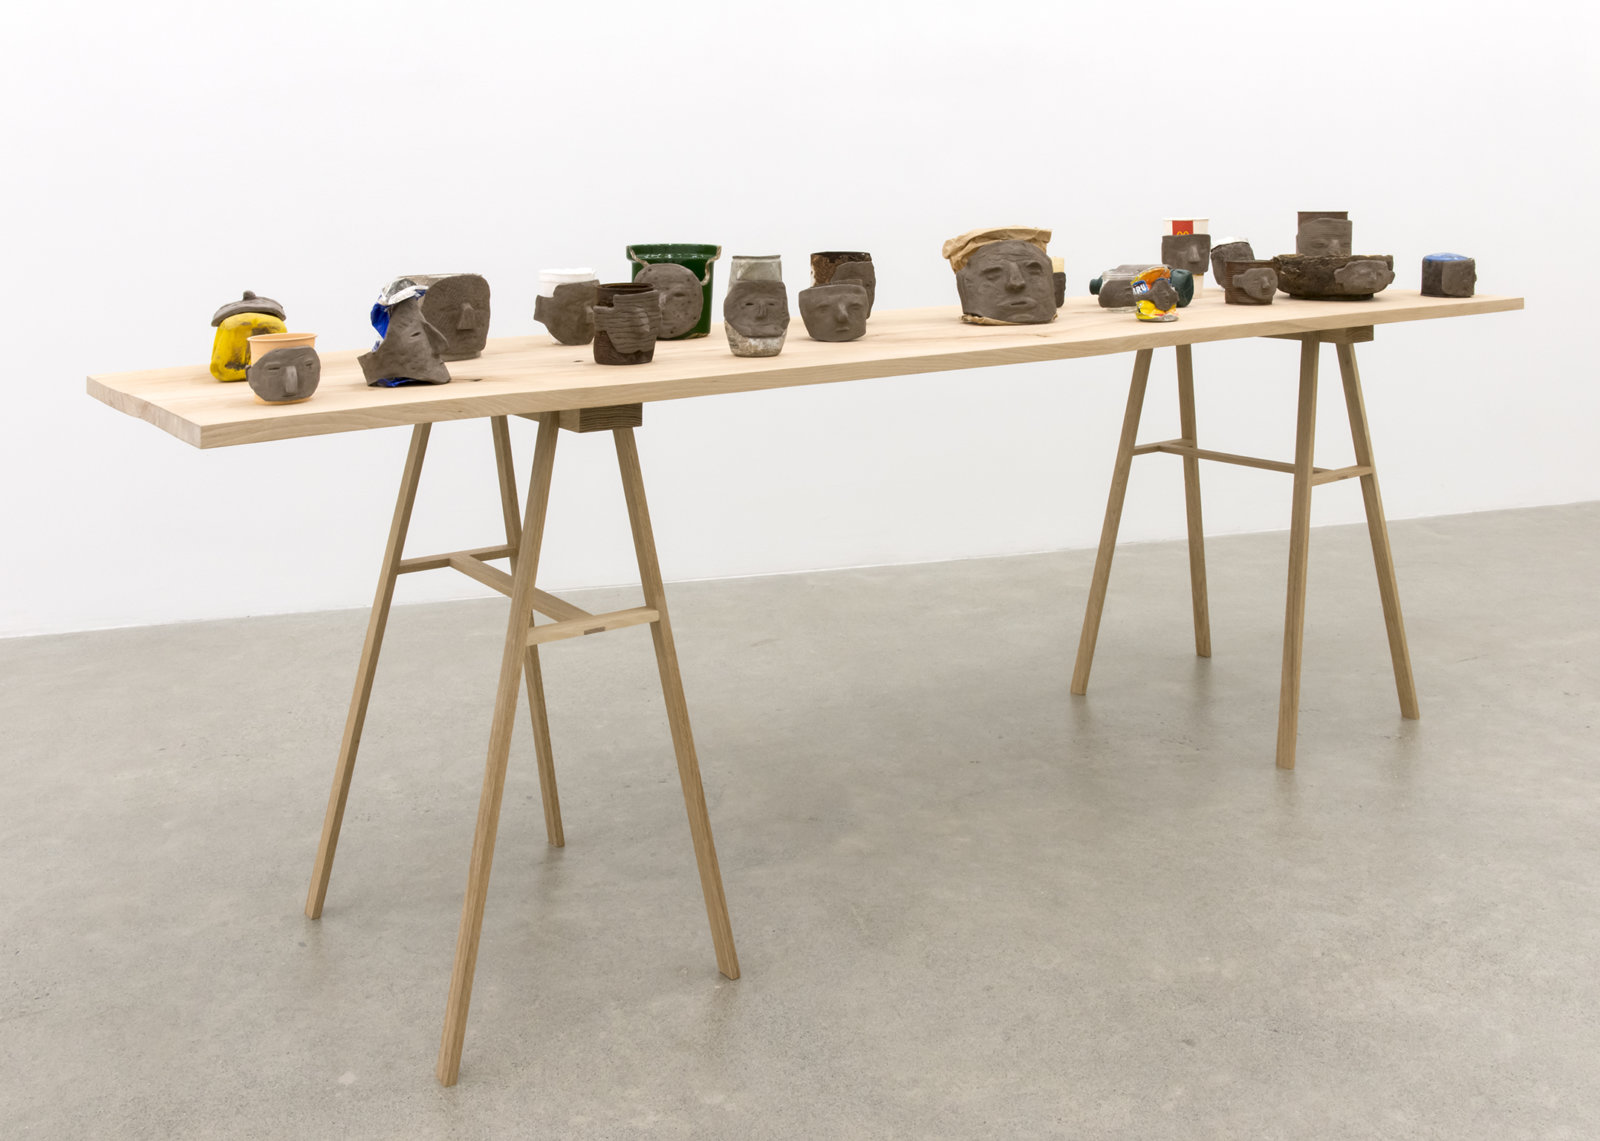 Ashes Withyman, Funeral Vessels, 2014–2017, found objects and unfired clay dredged from the Forth and Clyde canal, Glasgow, 40 x 96 x 23 in. (100 x 243 x 58 cm)